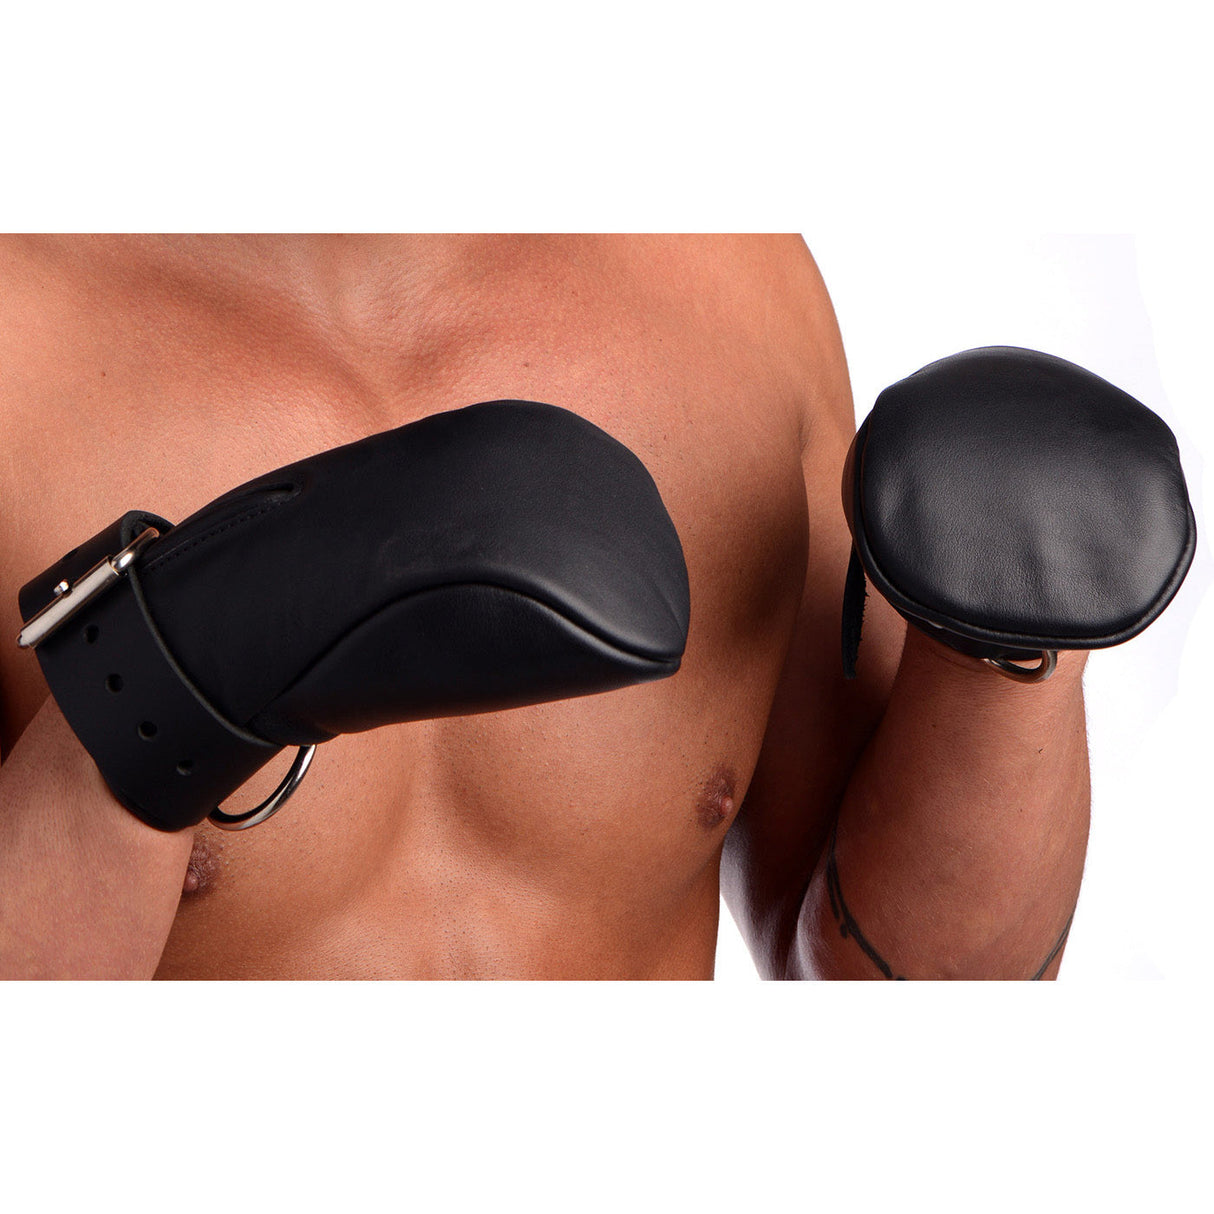 Strict Leather Deluxe Padded Fist Mitts - S/M